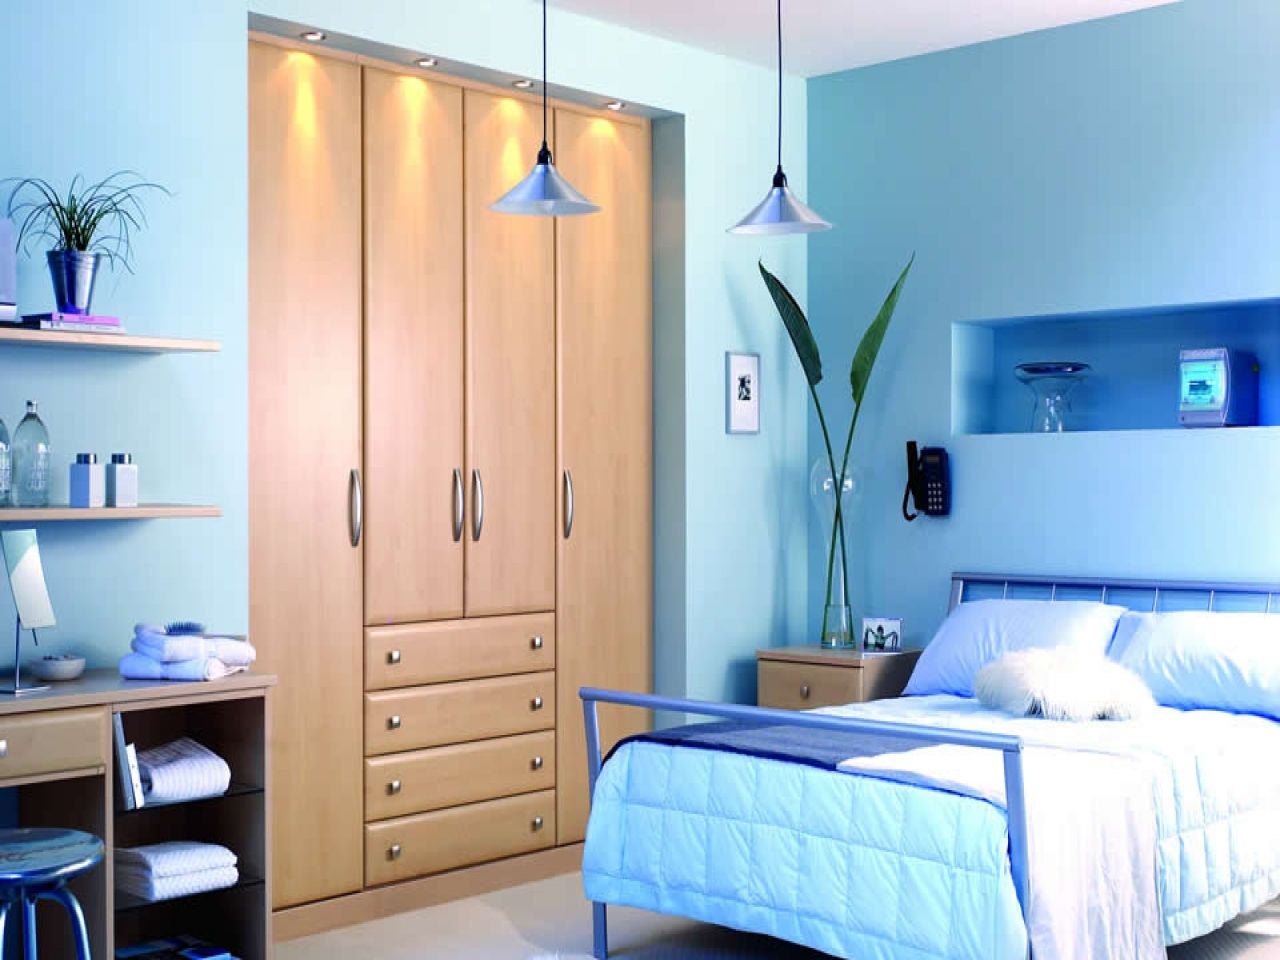 great-sky-blue-color-for-bedroom-31-for-with-sky-blue-color-for-bedroom-bd62de1d69e88c71f1341e523b209e6f.jpg